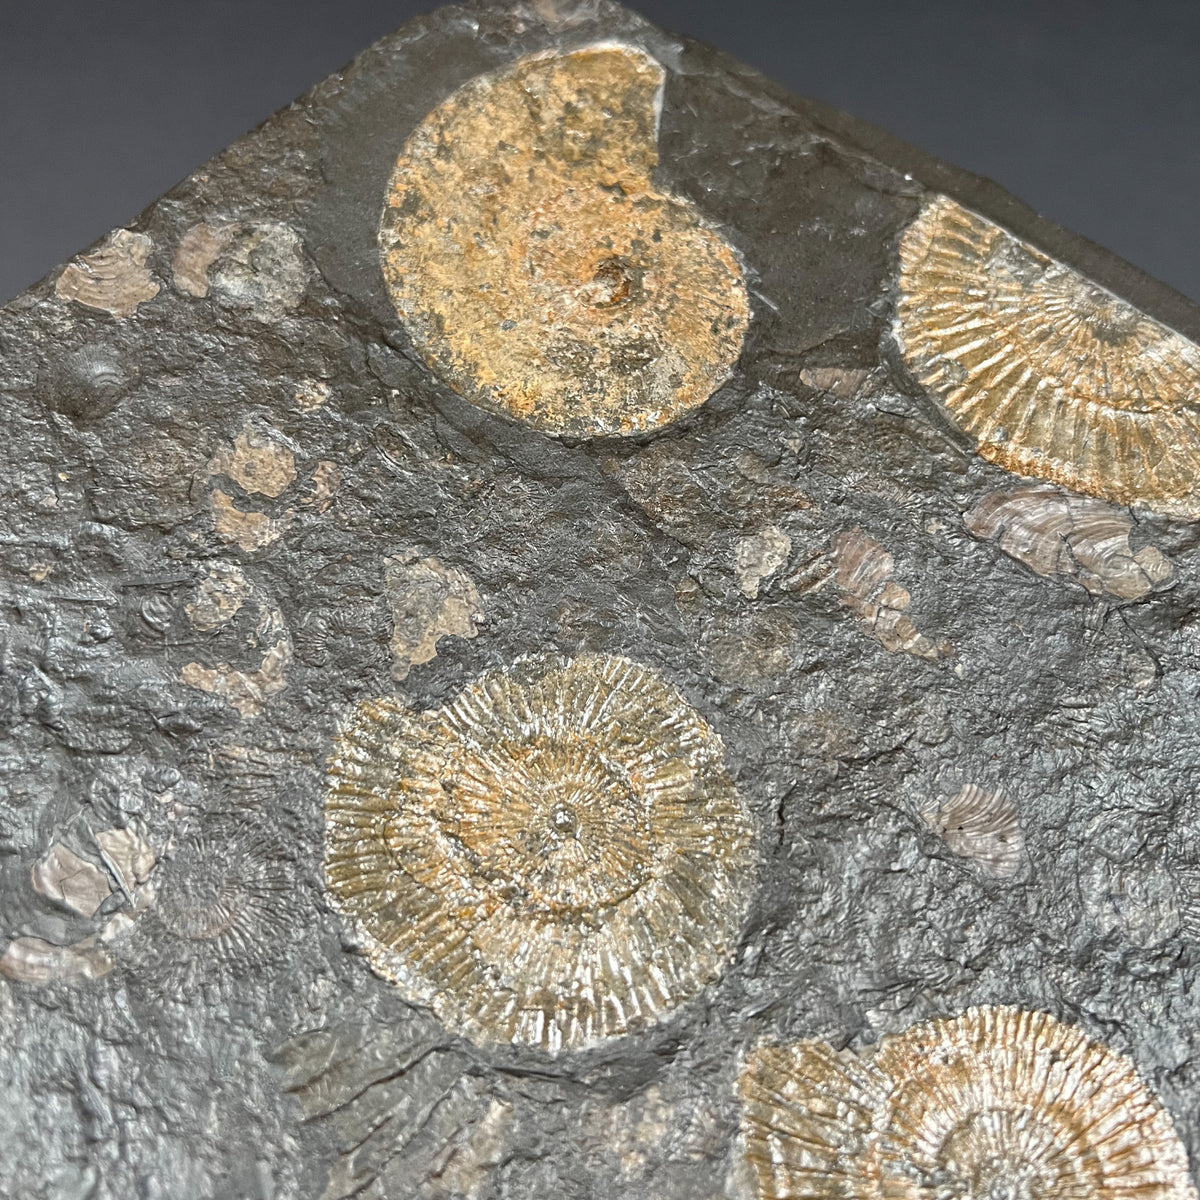 Harpoceras and Dactylioceras Ammonites in Shale Matrix from Germany